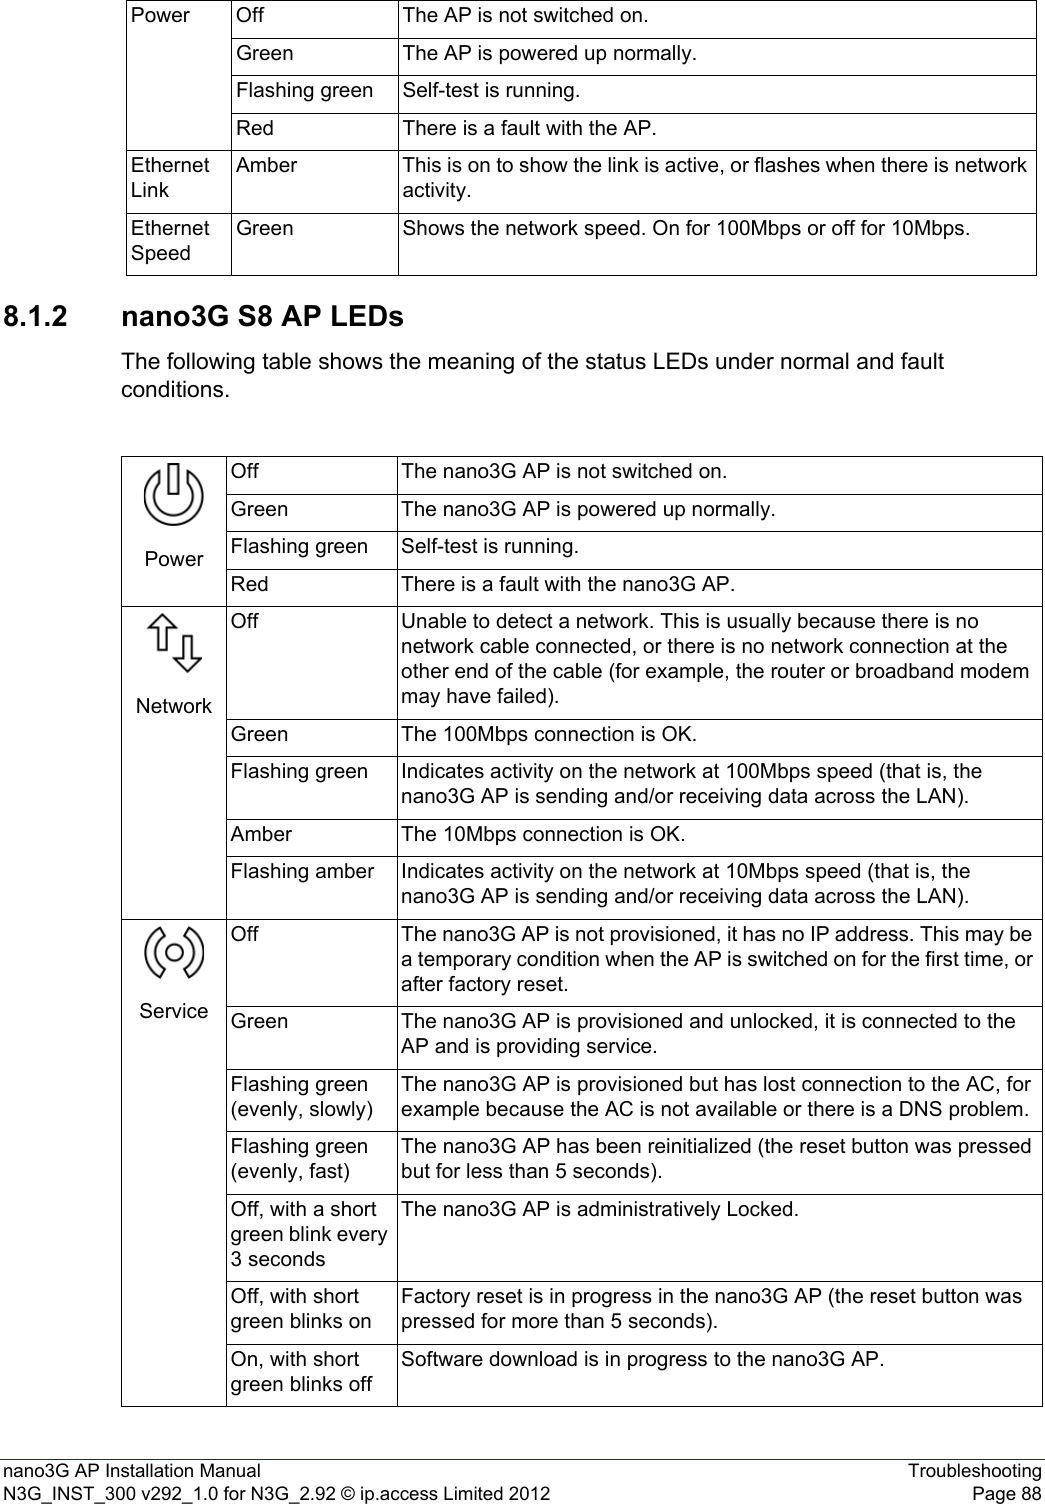 nano3G AP Installation Manual TroubleshootingN3G_INST_300 v292_1.0 for N3G_2.92 © ip.access Limited 2012 Page 888.1.2 nano3G S8 AP LEDsThe following table shows the meaning of the status LEDs under normal and fault conditions.Power Off The AP is not switched on.Green The AP is powered up normally.Flashing green Self-test is running.Red There is a fault with the AP.Ethernet LinkAmber This is on to show the link is active, or flashes when there is network activity. Ethernet SpeedGreen Shows the network speed. On for 100Mbps or off for 10Mbps. PowerOff The nano3G AP is not switched on.Green The nano3G AP is powered up normally.Flashing green Self-test is running.Red There is a fault with the nano3G AP.NetworkOff Unable to detect a network. This is usually because there is no network cable connected, or there is no network connection at the other end of the cable (for example, the router or broadband modem may have failed).Green The 100Mbps connection is OK.Flashing green Indicates activity on the network at 100Mbps speed (that is, the nano3G AP is sending and/or receiving data across the LAN).Amber The 10Mbps connection is OK.Flashing amber Indicates activity on the network at 10Mbps speed (that is, the nano3G AP is sending and/or receiving data across the LAN).ServiceOff The nano3G AP is not provisioned, it has no IP address. This may be a temporary condition when the AP is switched on for the first time, or after factory reset.Green The nano3G AP is provisioned and unlocked, it is connected to the AP and is providing service.Flashing green (evenly, slowly)The nano3G AP is provisioned but has lost connection to the AC, for example because the AC is not available or there is a DNS problem.Flashing green (evenly, fast)The nano3G AP has been reinitialized (the reset button was pressed but for less than 5 seconds).Off, with a short green blink every 3 secondsThe nano3G AP is administratively Locked. Off, with short green blinks onFactory reset is in progress in the nano3G AP (the reset button was pressed for more than 5 seconds).On, with short green blinks offSoftware download is in progress to the nano3G AP.